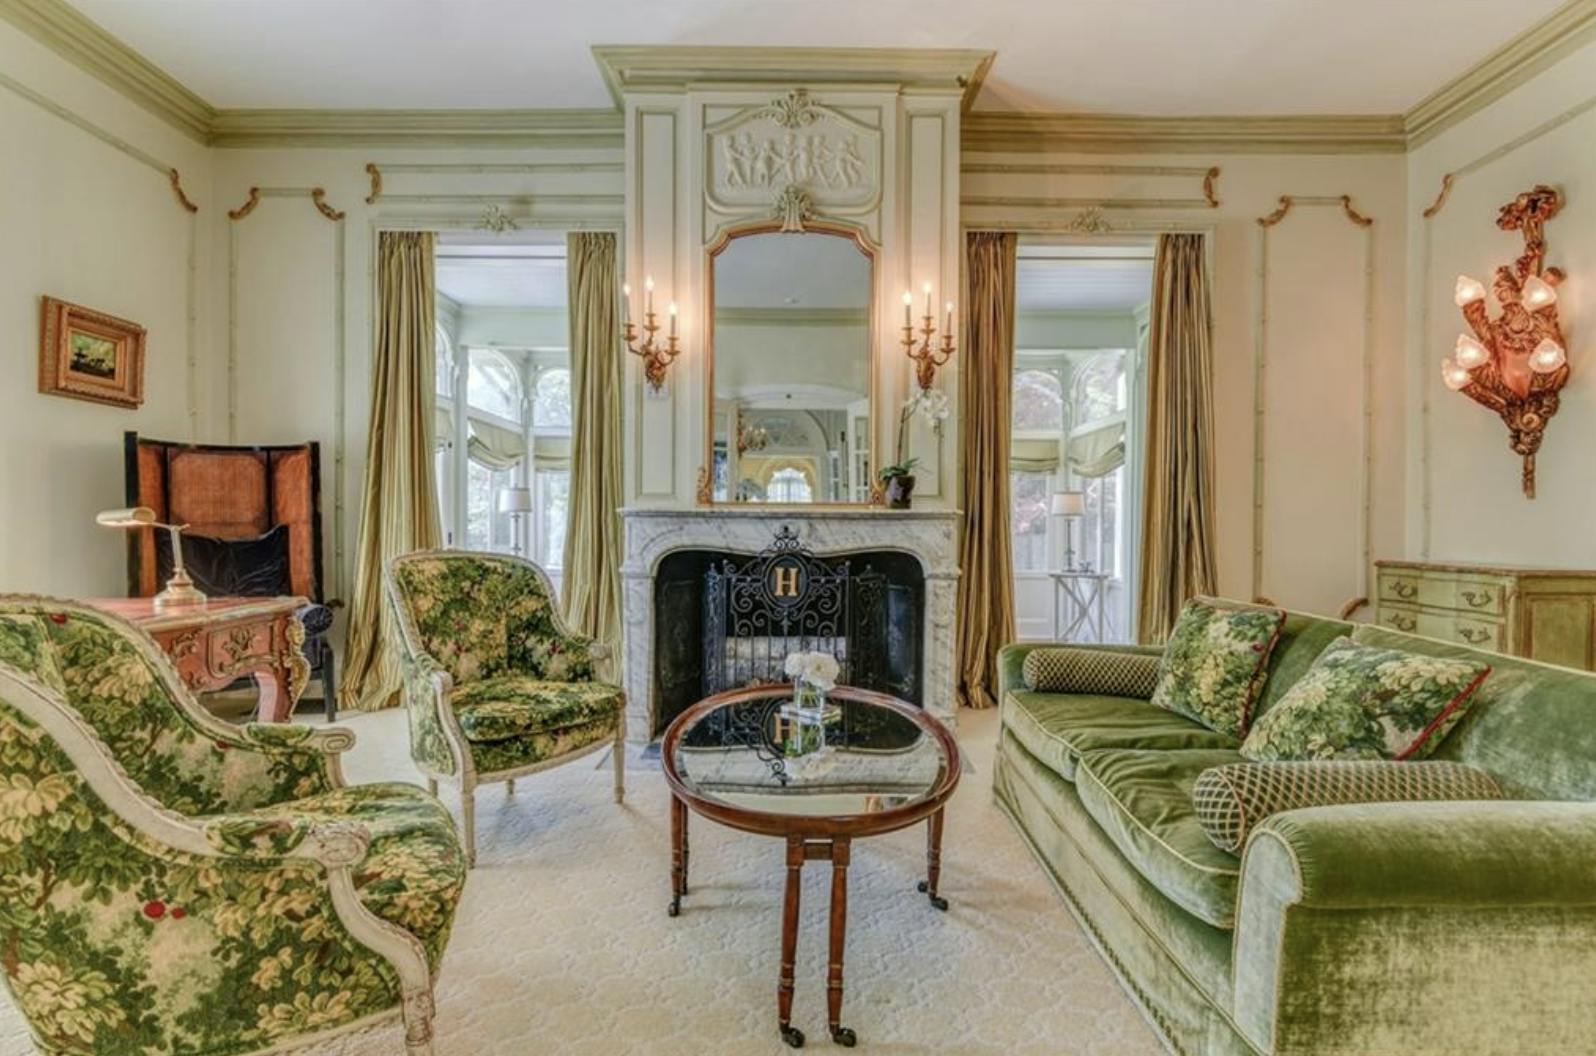 This Fifth Avenue Home is One of the Last Gilded Age Mansions in